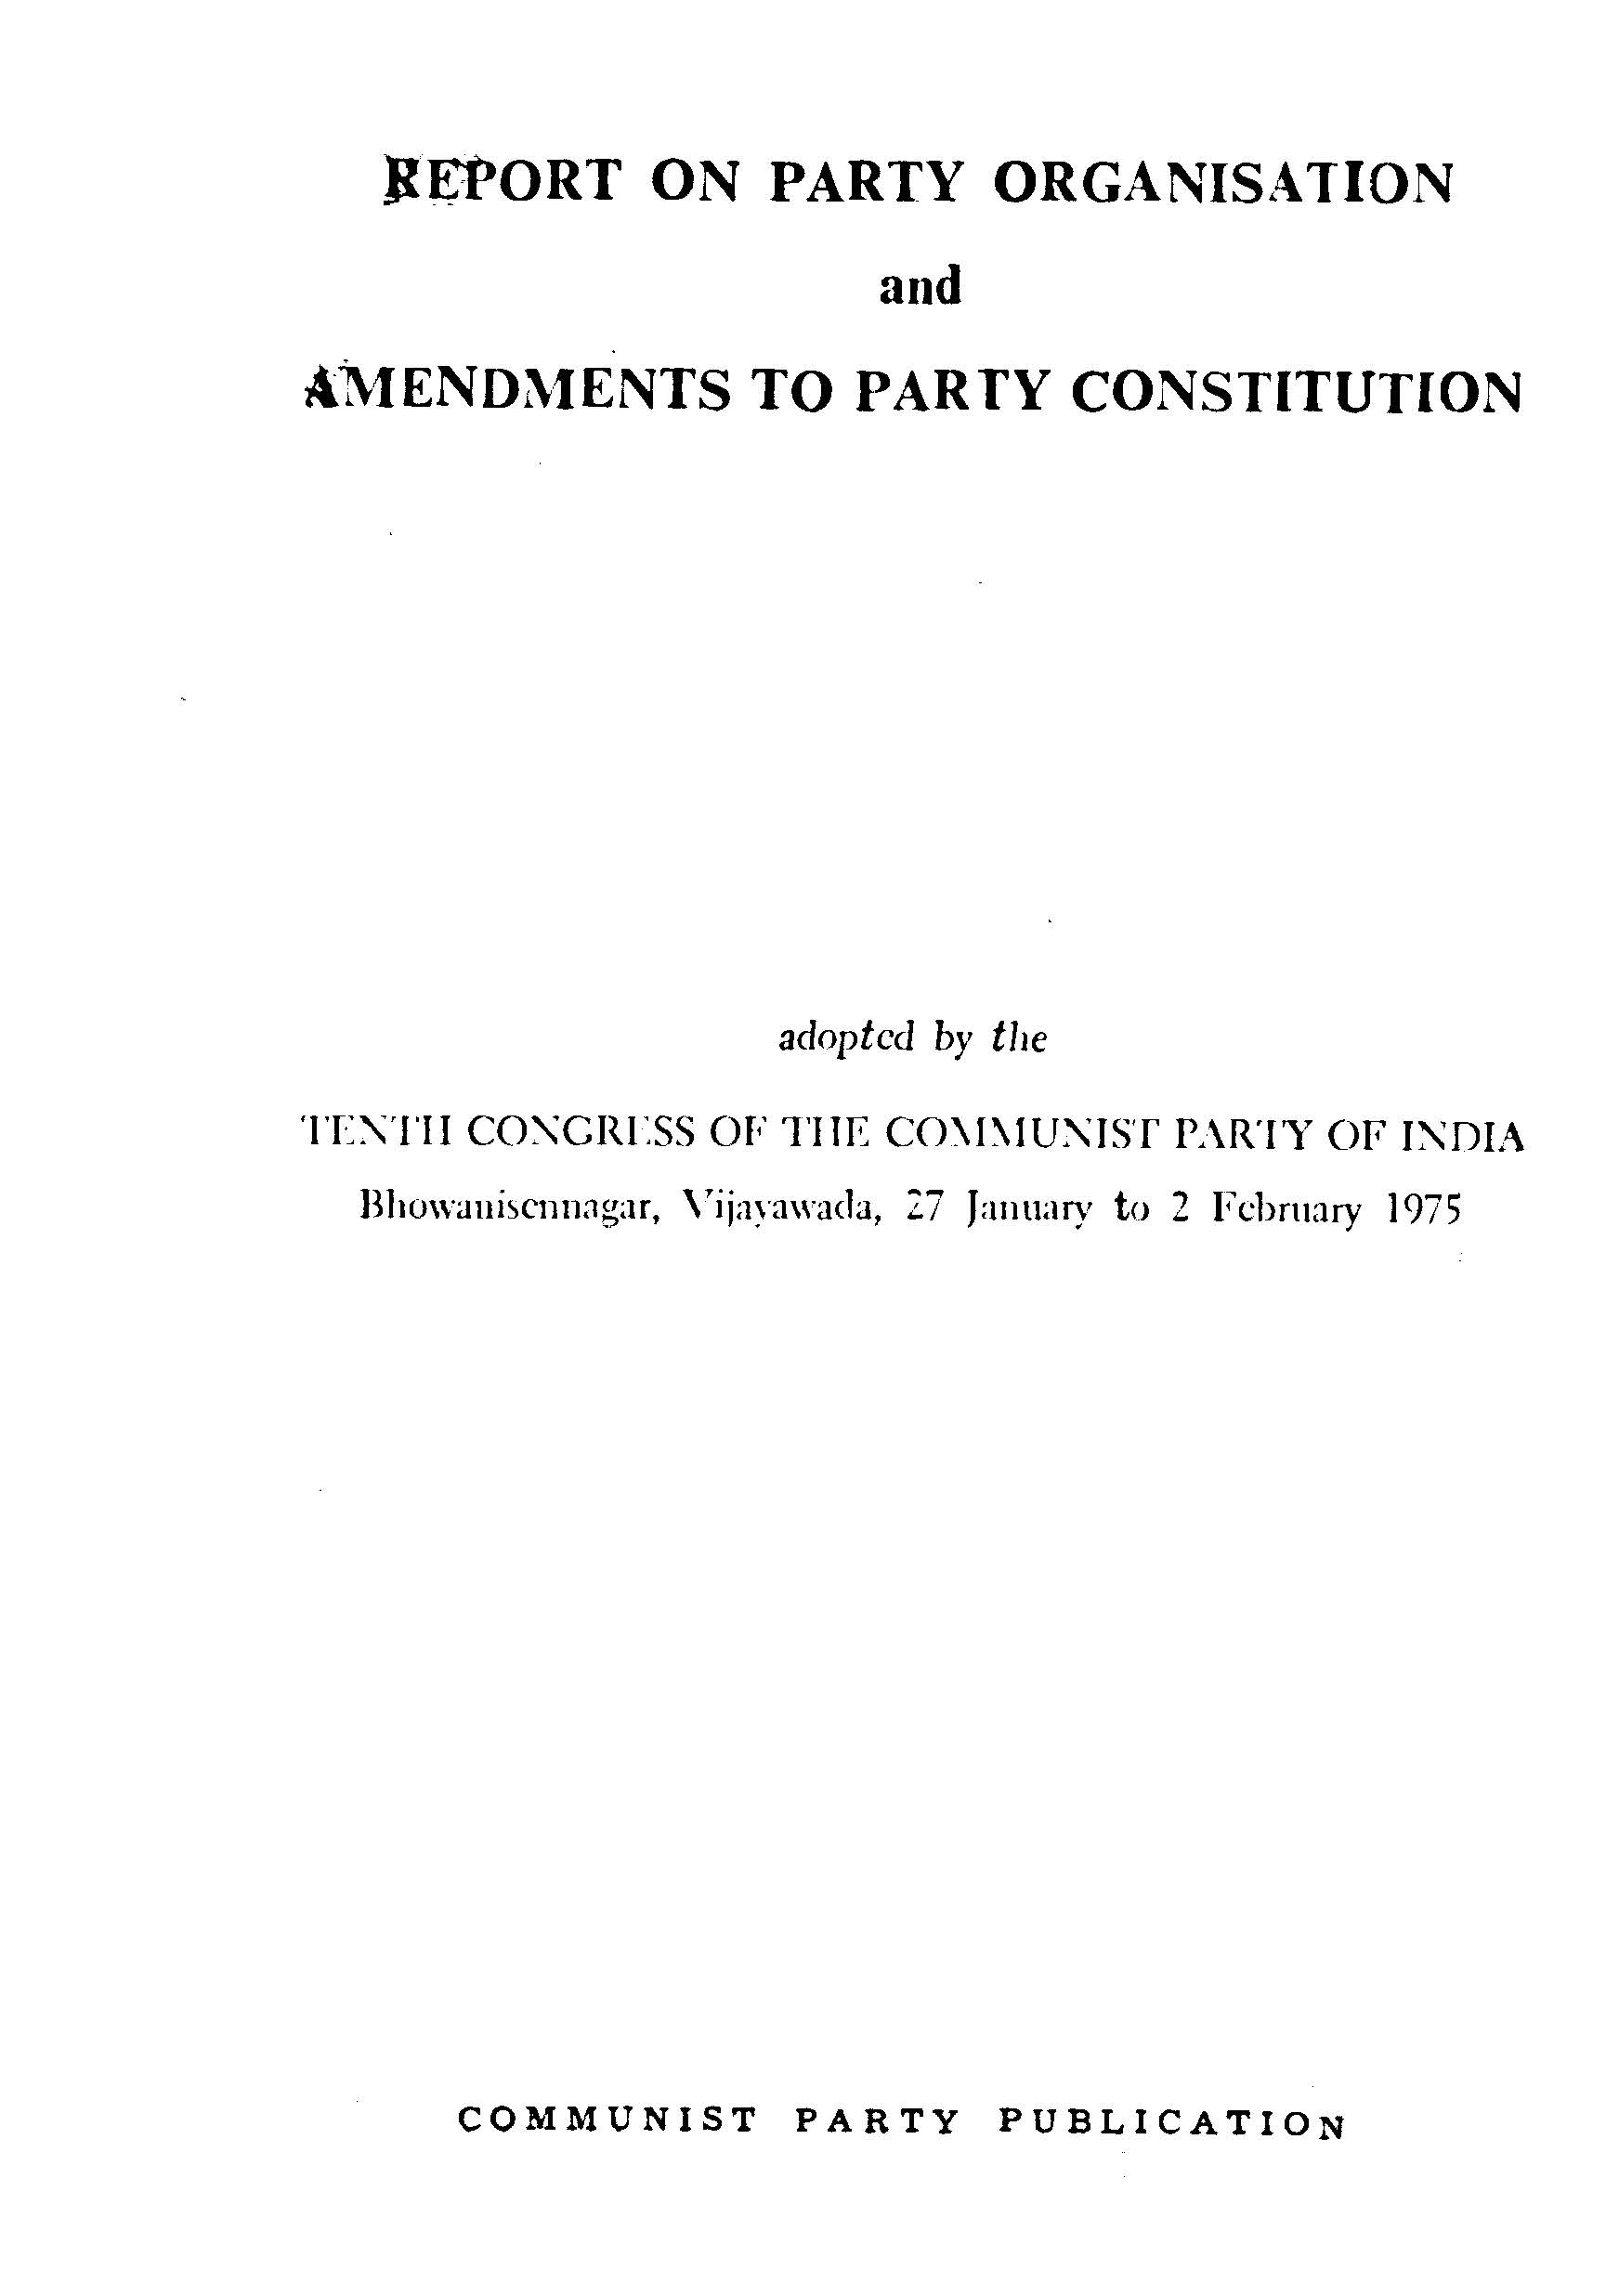 Report On Partry Organisation and Amendments To Party Constitution (27 January  to 2 February 1975)